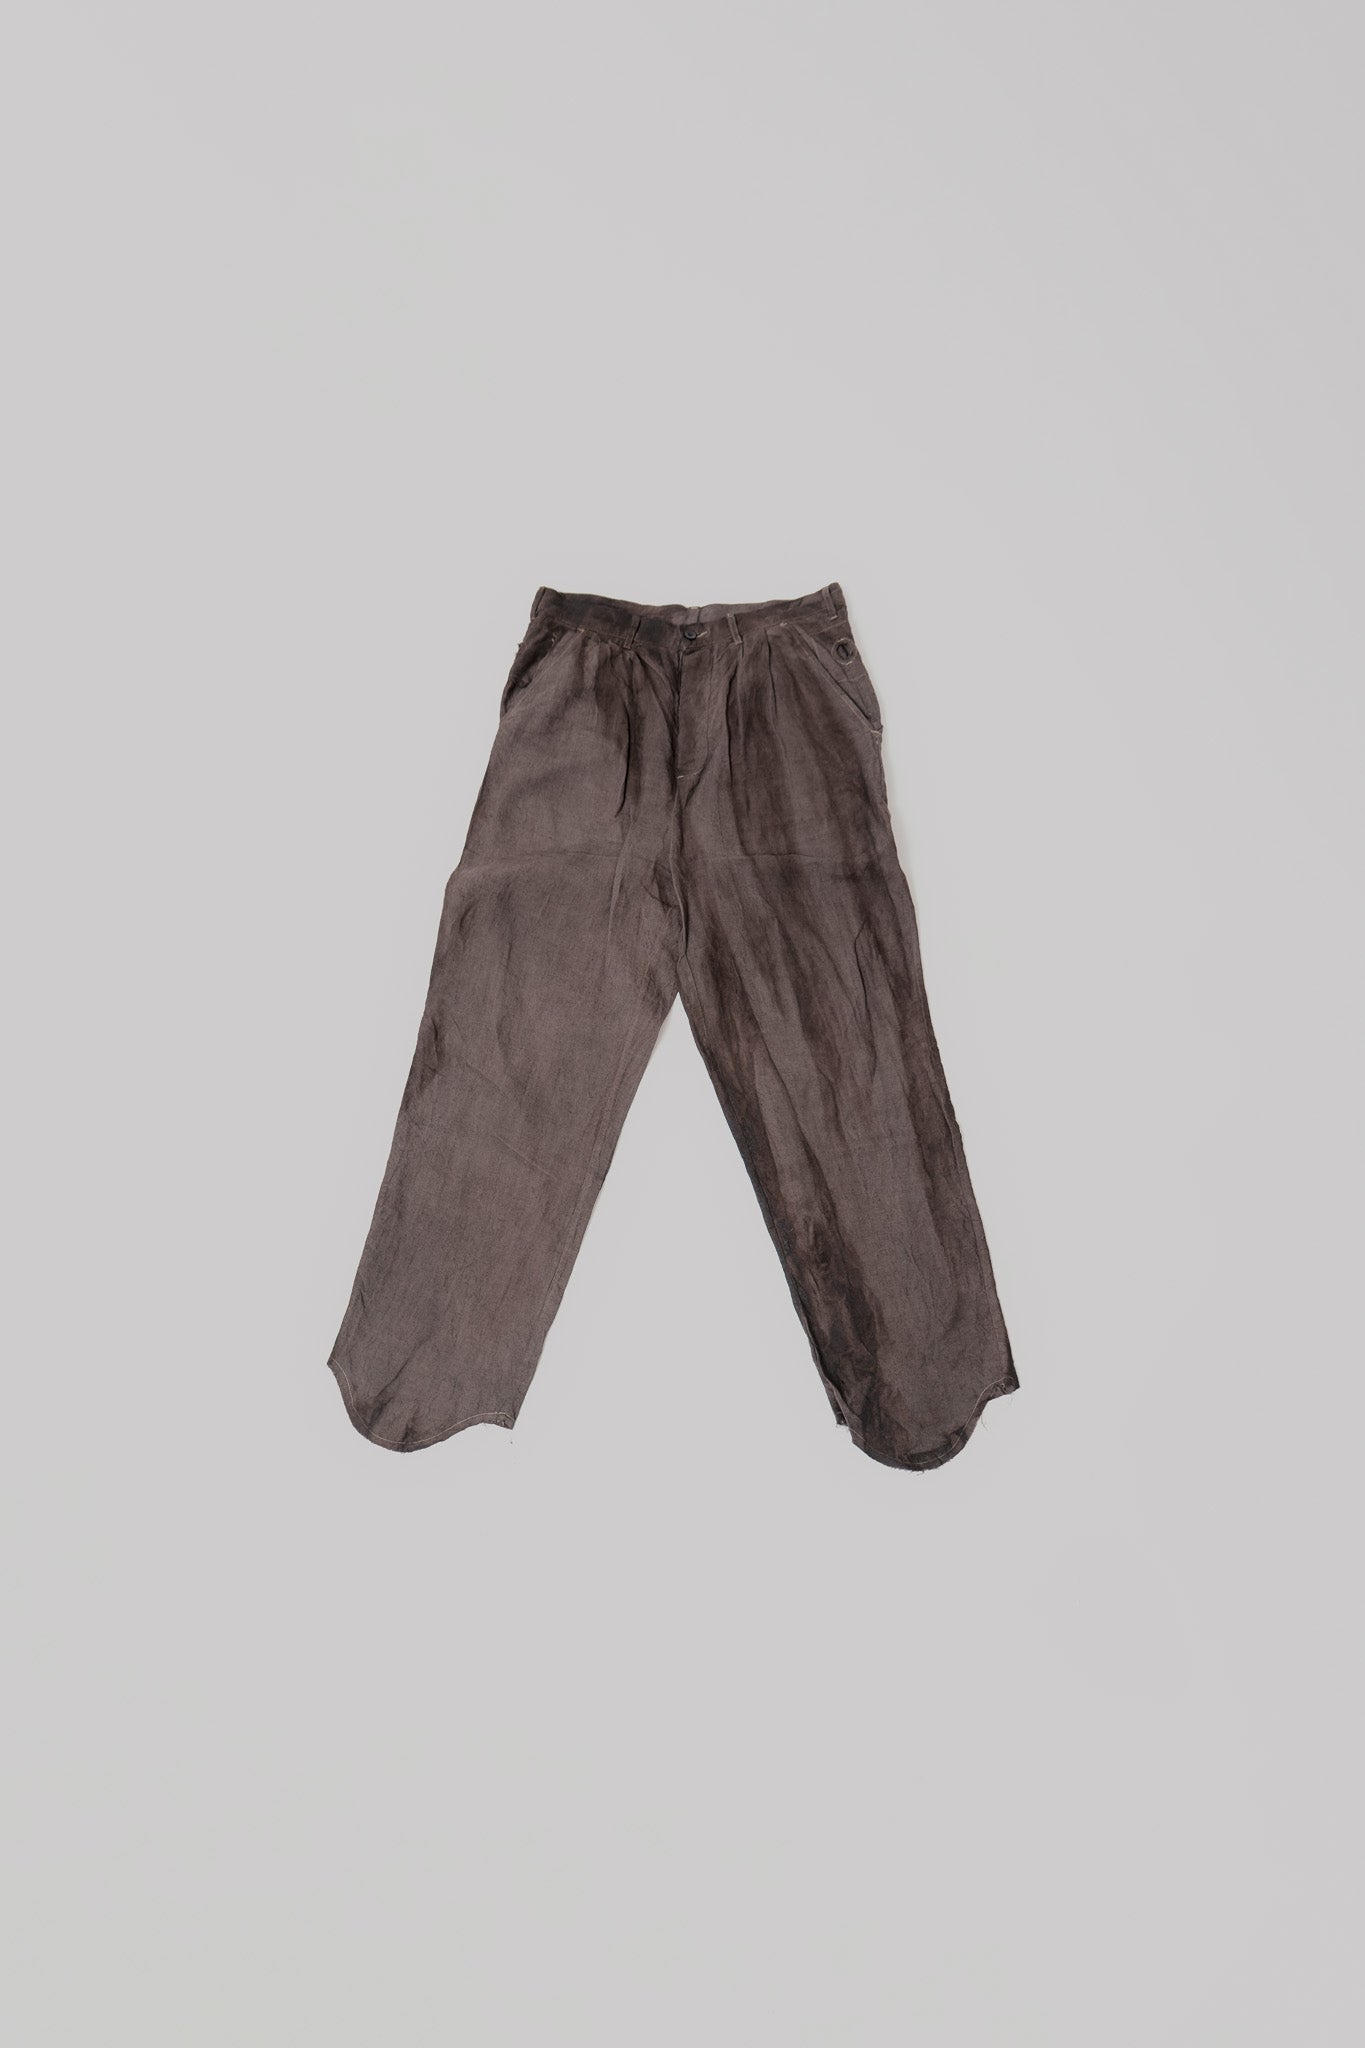 040 - Basic Straight Pants in Linen (Brown)